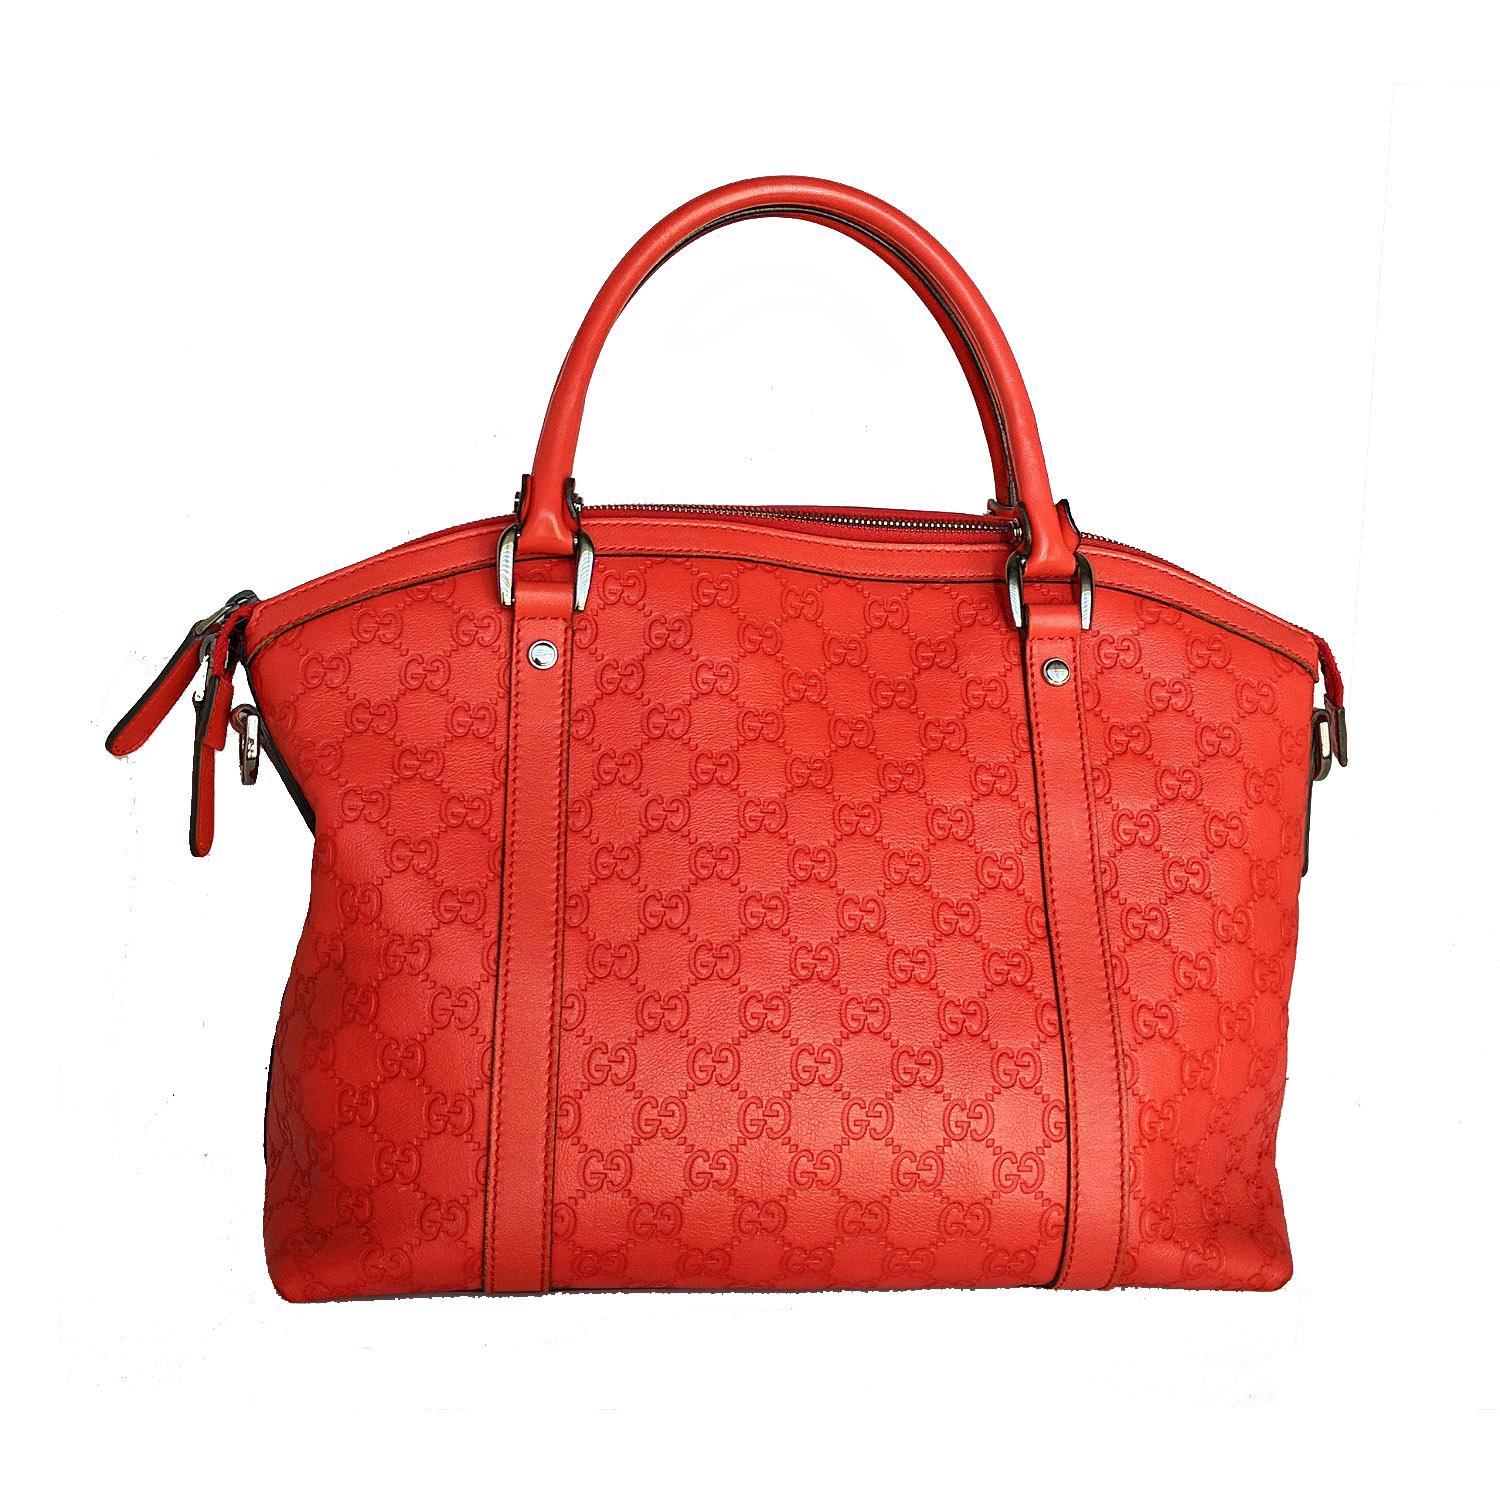 This stylish tote is finely crafted of Guccissima monogram embossed leather in red. The tote features thin and sturdy leather strap top handles and a top zipper. The bag opens to a fabric interior with a zipper and patch pockets.

Designer: